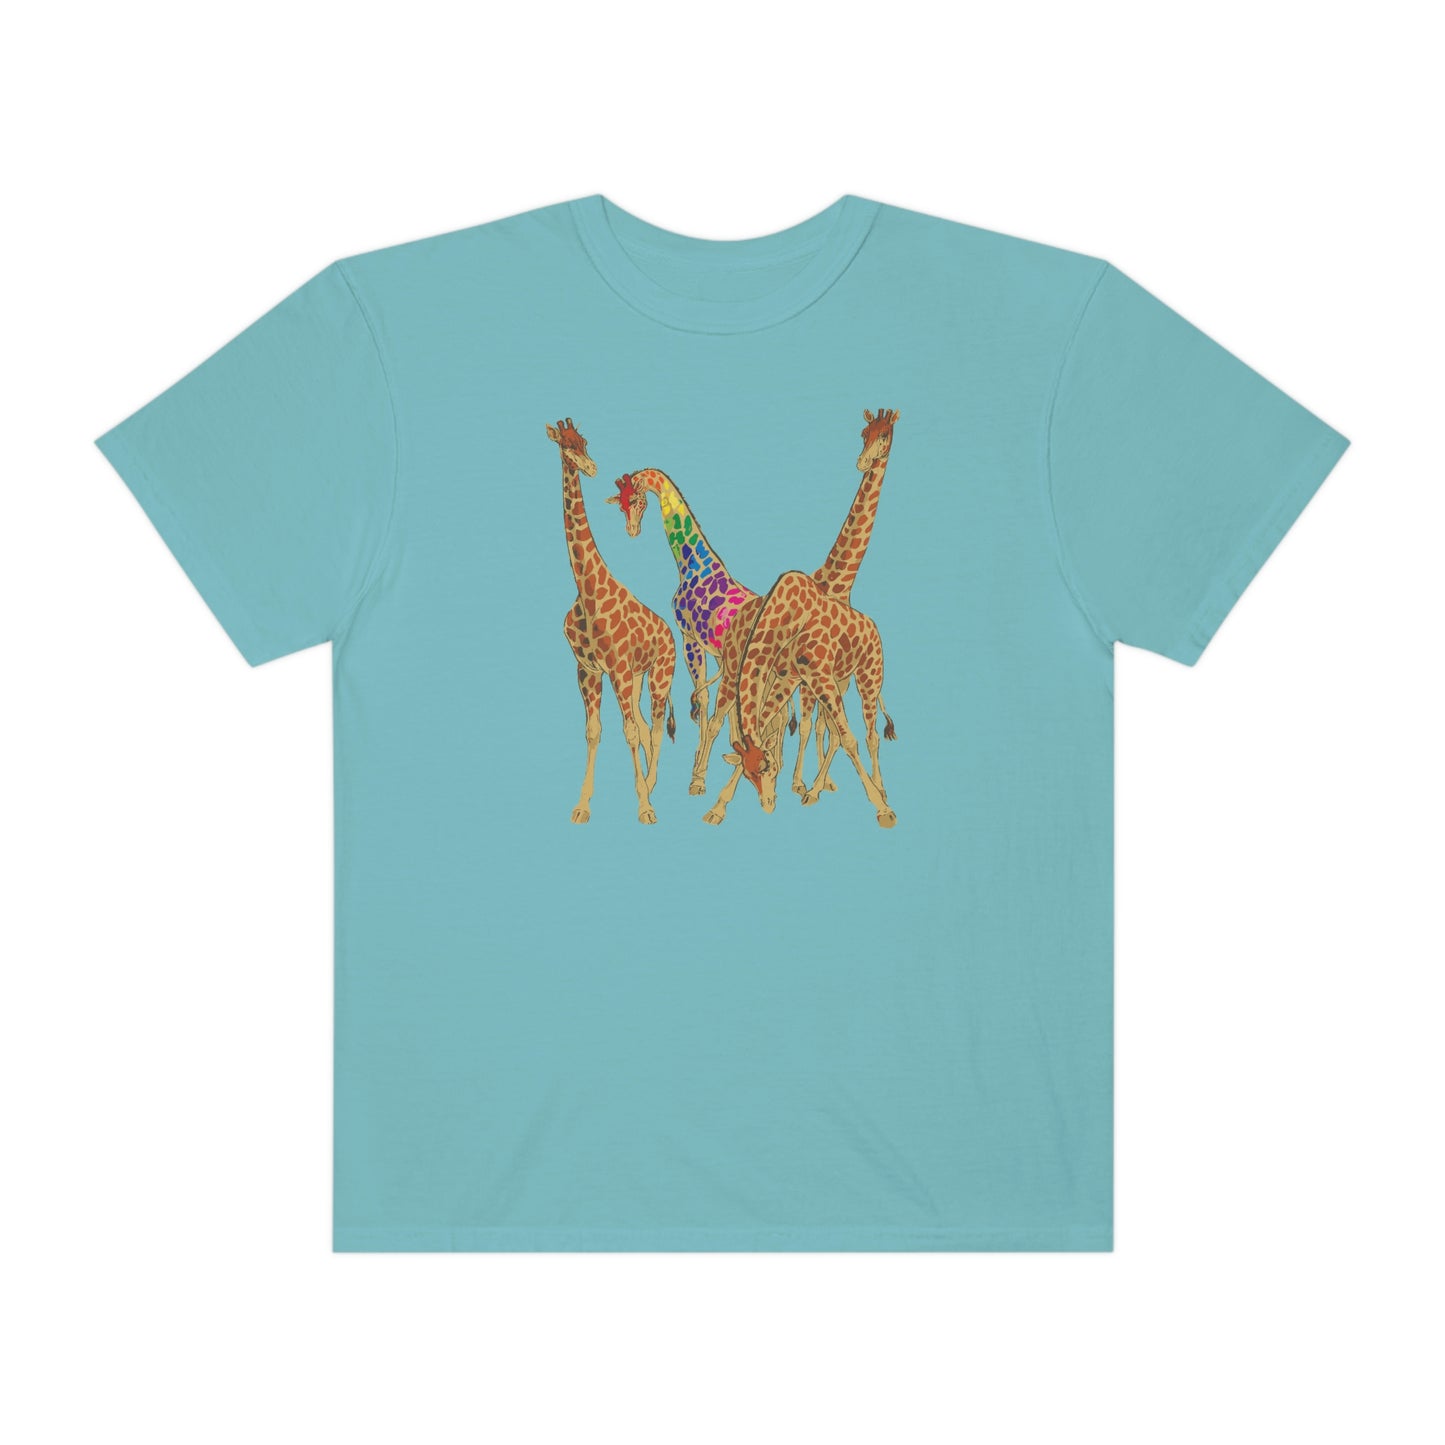 Out In The Crowd T-shirt